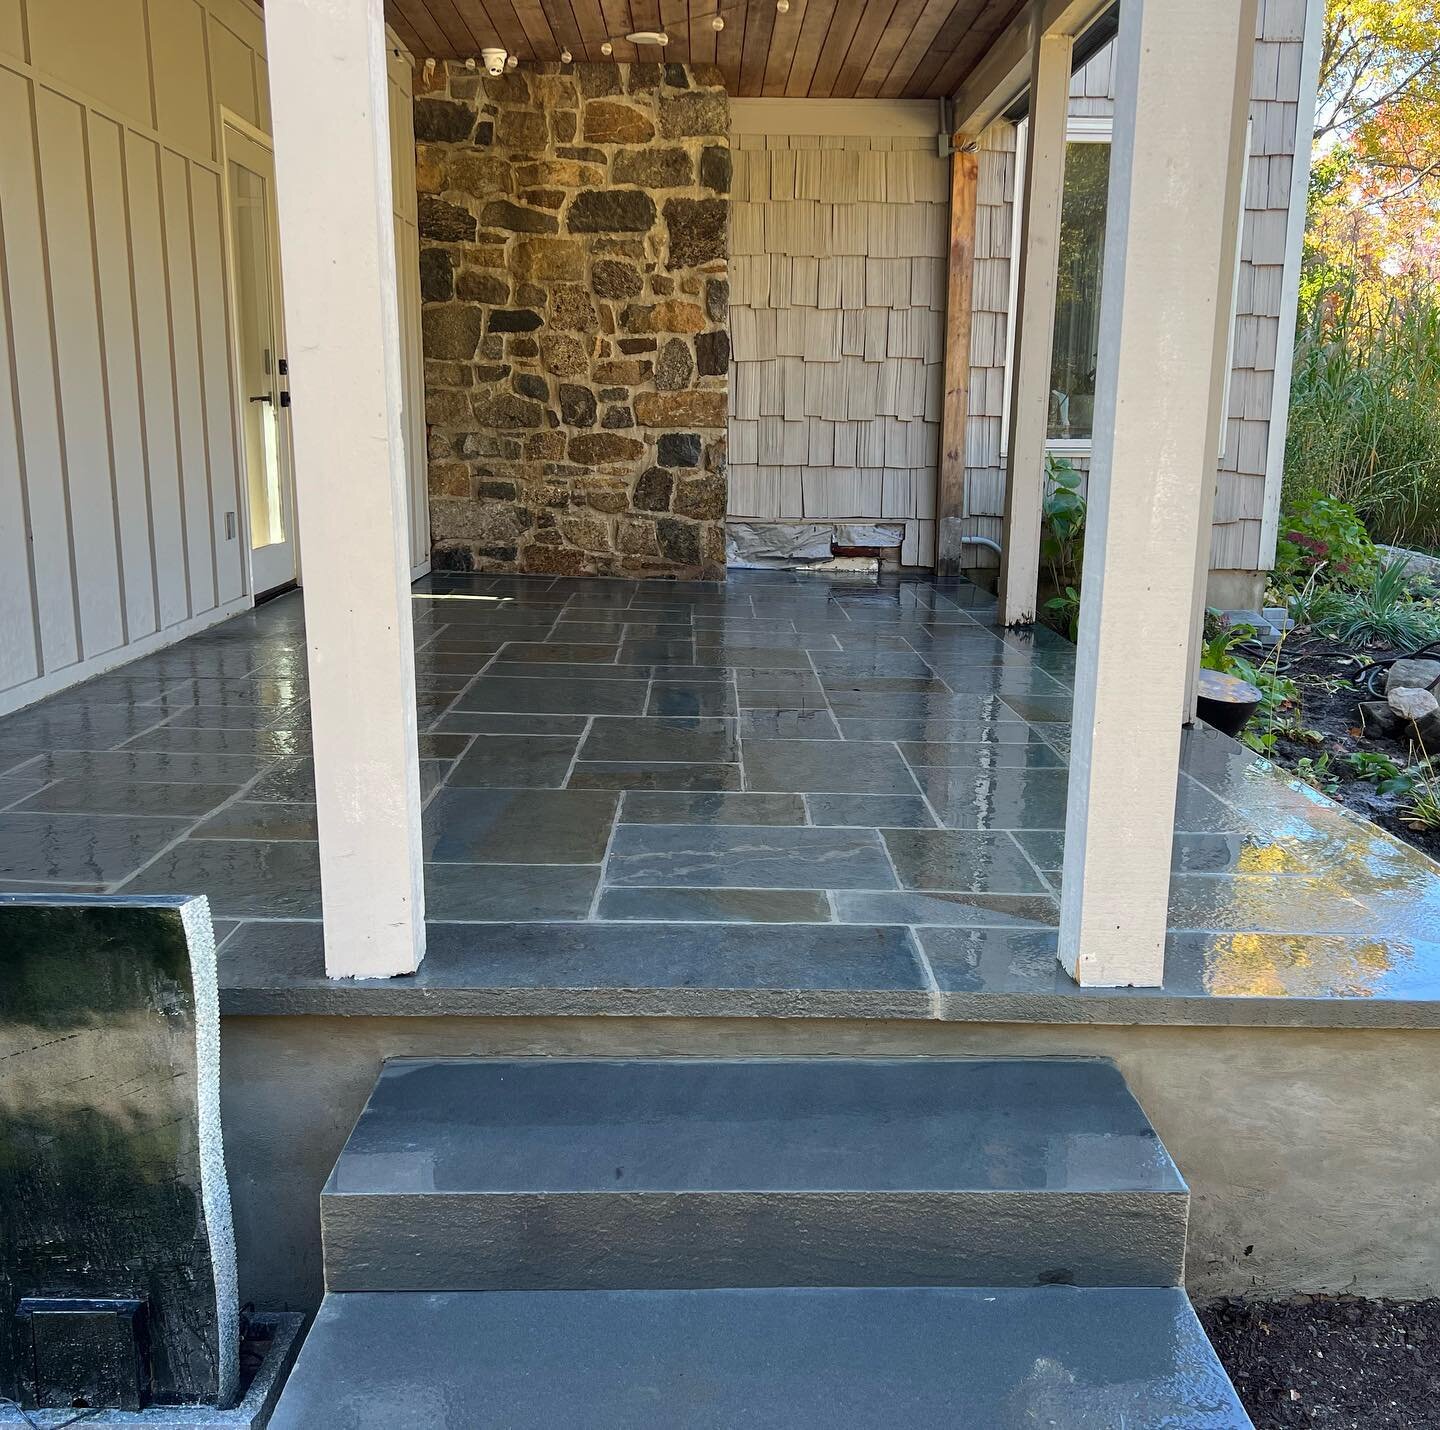 Want to feel like royalty when walking into your home? Check out this GRAND entrance! New Bluestone porch/patio, natural face steps and resurfaced concrete foundation.
#bluestoneboyz #naturalstone #patiopros #homerenovations #wedemboyz! #wearentgiven